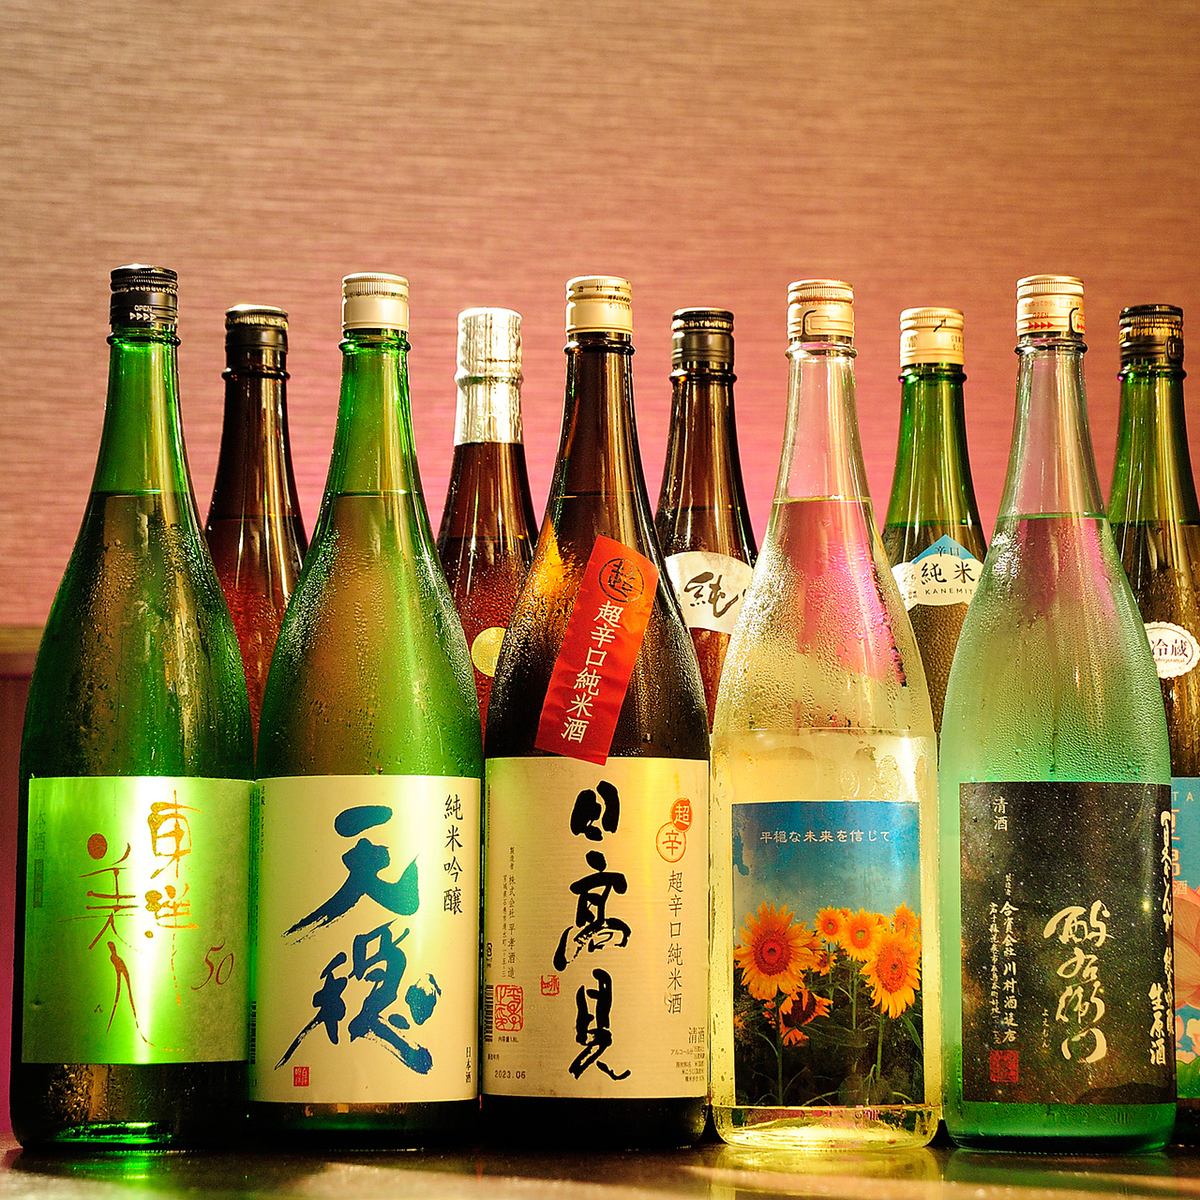 Lunch is available from 12:00! There is also an all-you-can-drink sake limited to lunch!